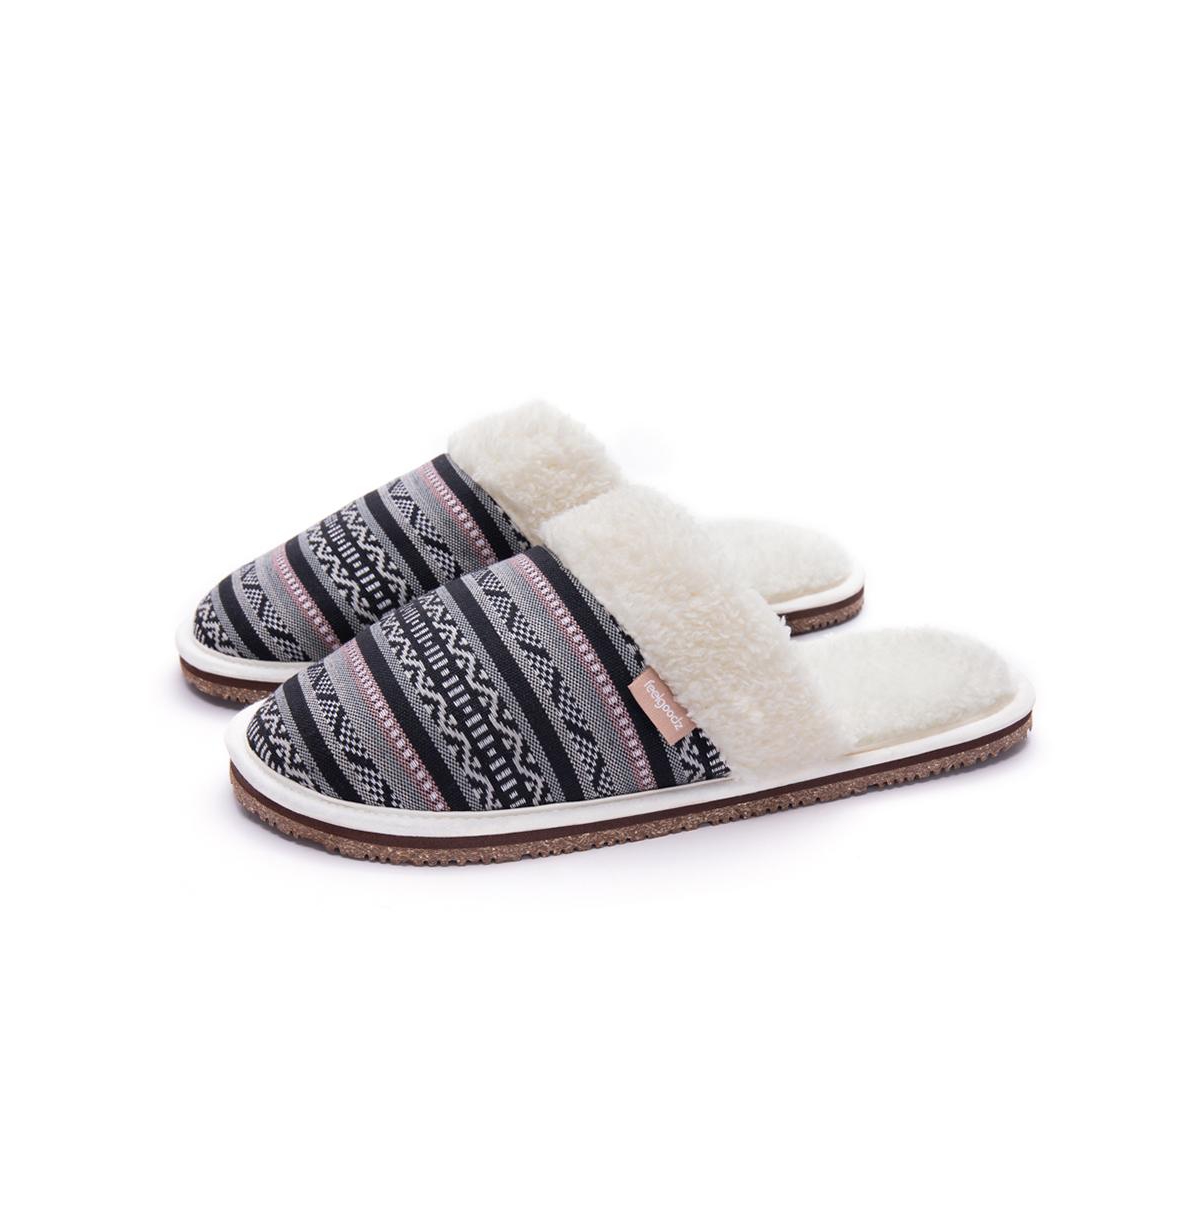 Women's Mule Slipper Artisan Woven Indoor / Outdoor House Shoes - Fig